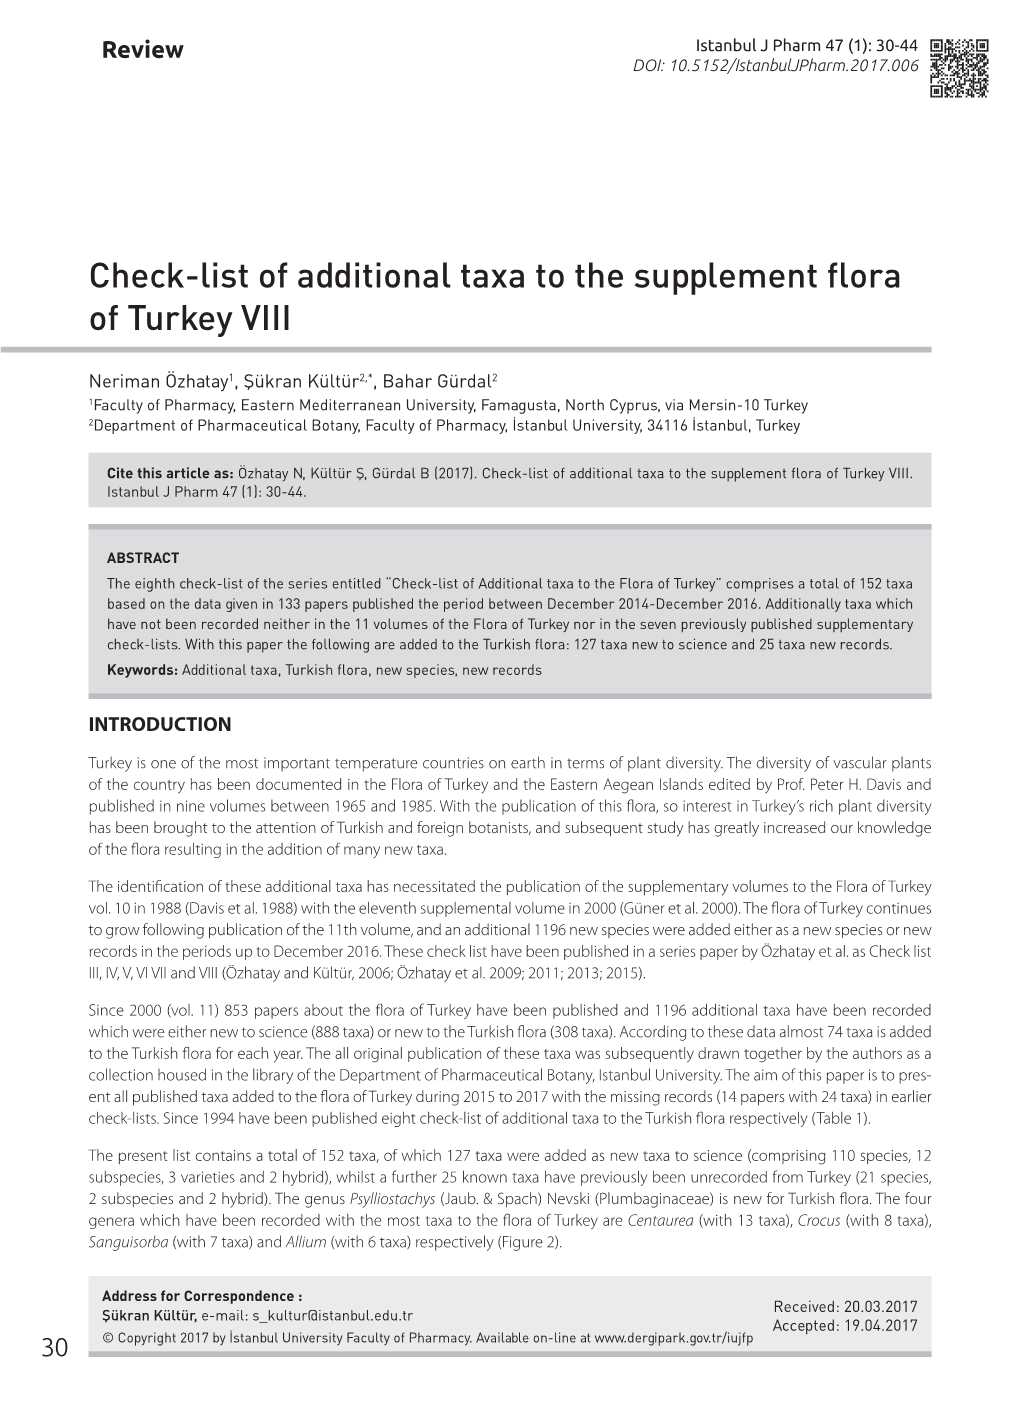 Check-List of Additional Taxa to the Supplement Flora of Turkey VIII